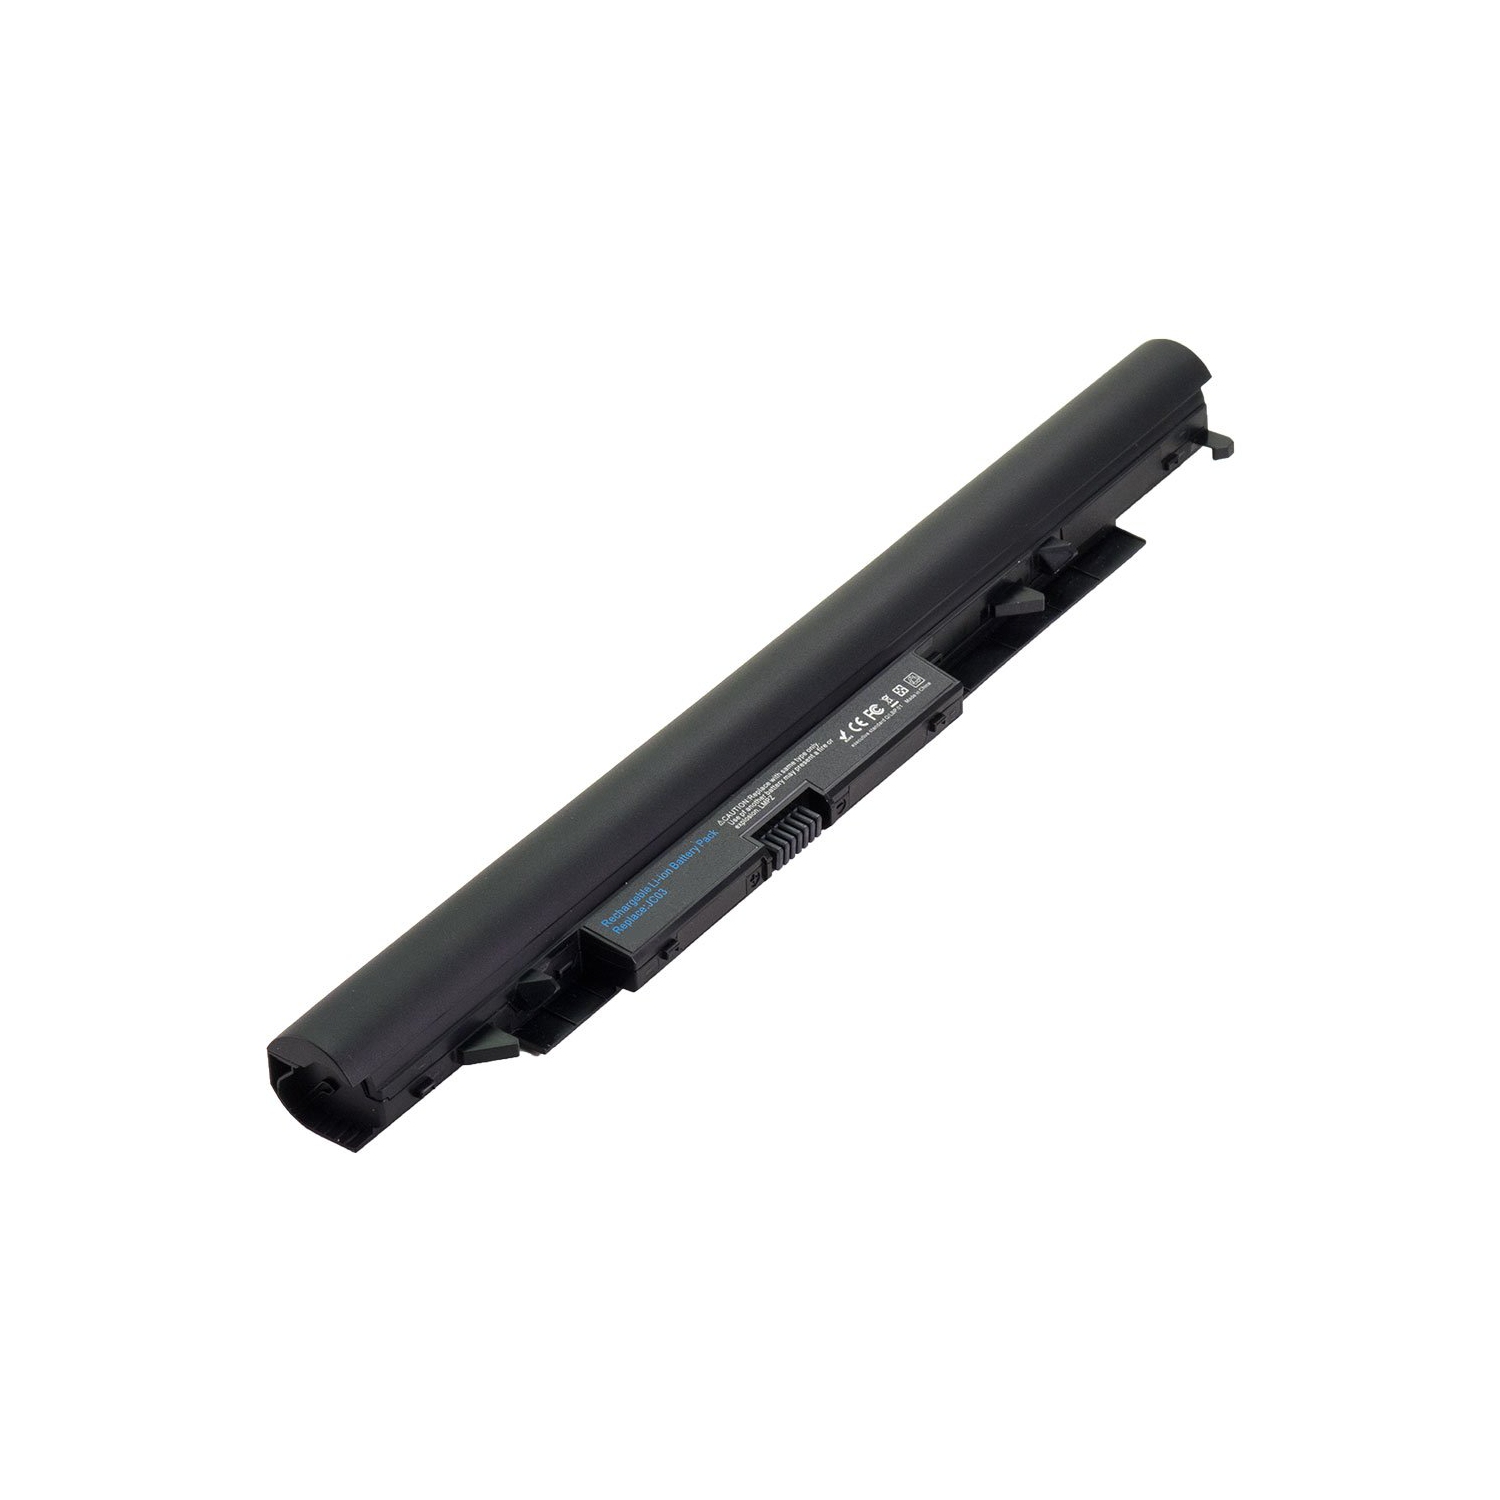 Laptop Battery Replacement for HP 250 G6 2SY46ES, 919681-241, 919682-831, HSTNN-L67N, JC04, TPN-C129, TPN-Q187